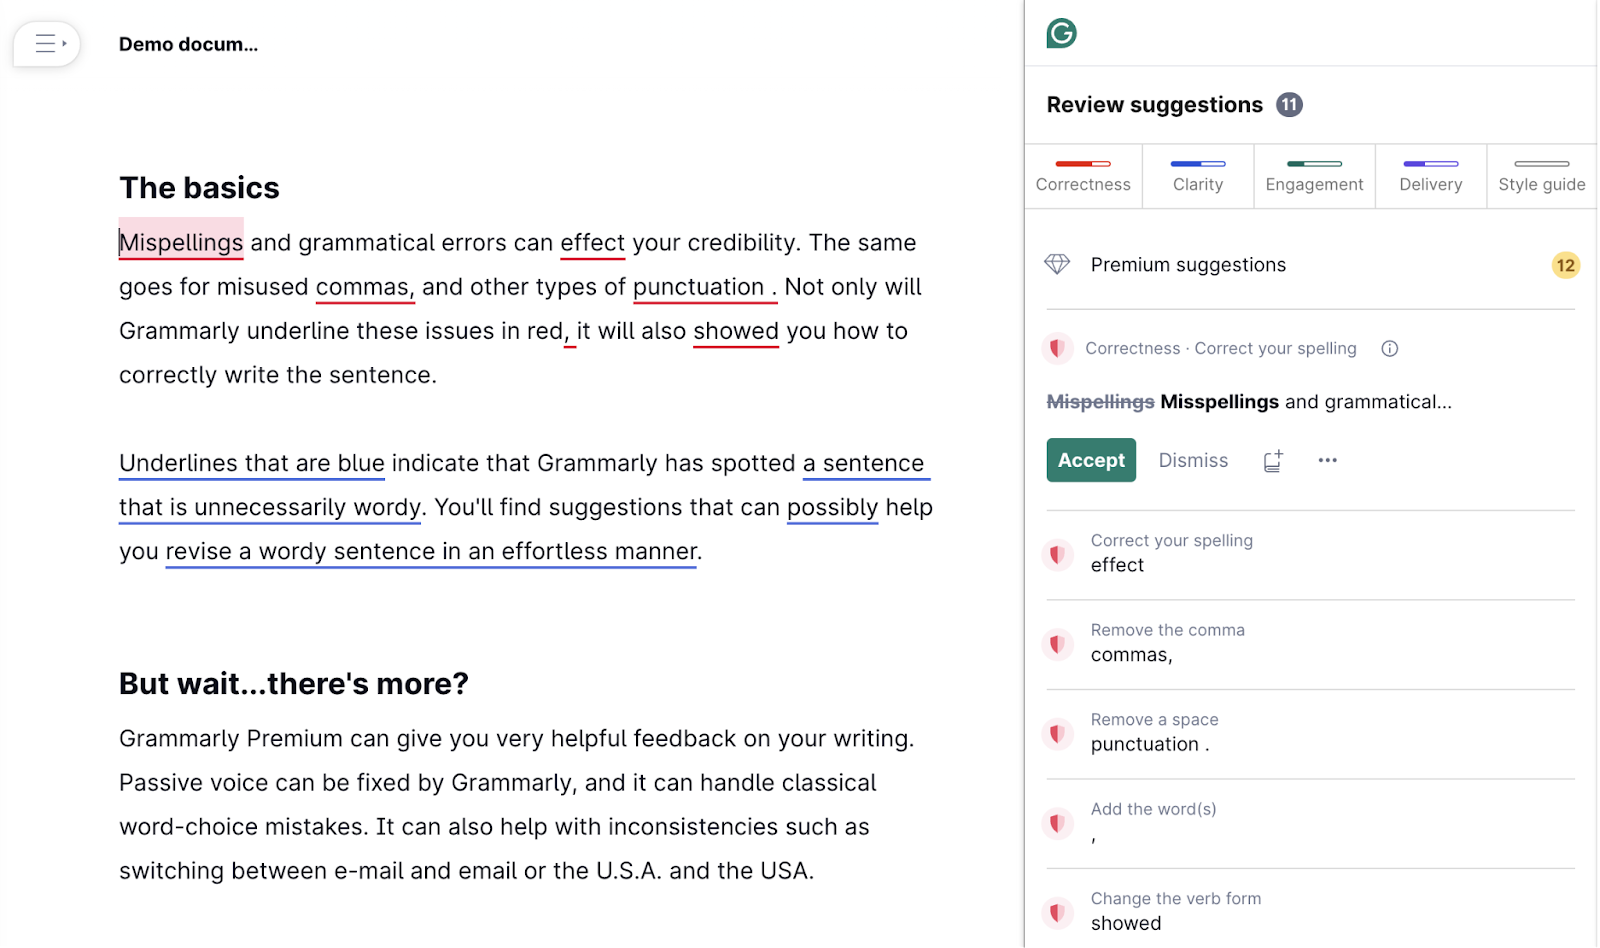 Grammarly demo document showing text with grammar suggestions.